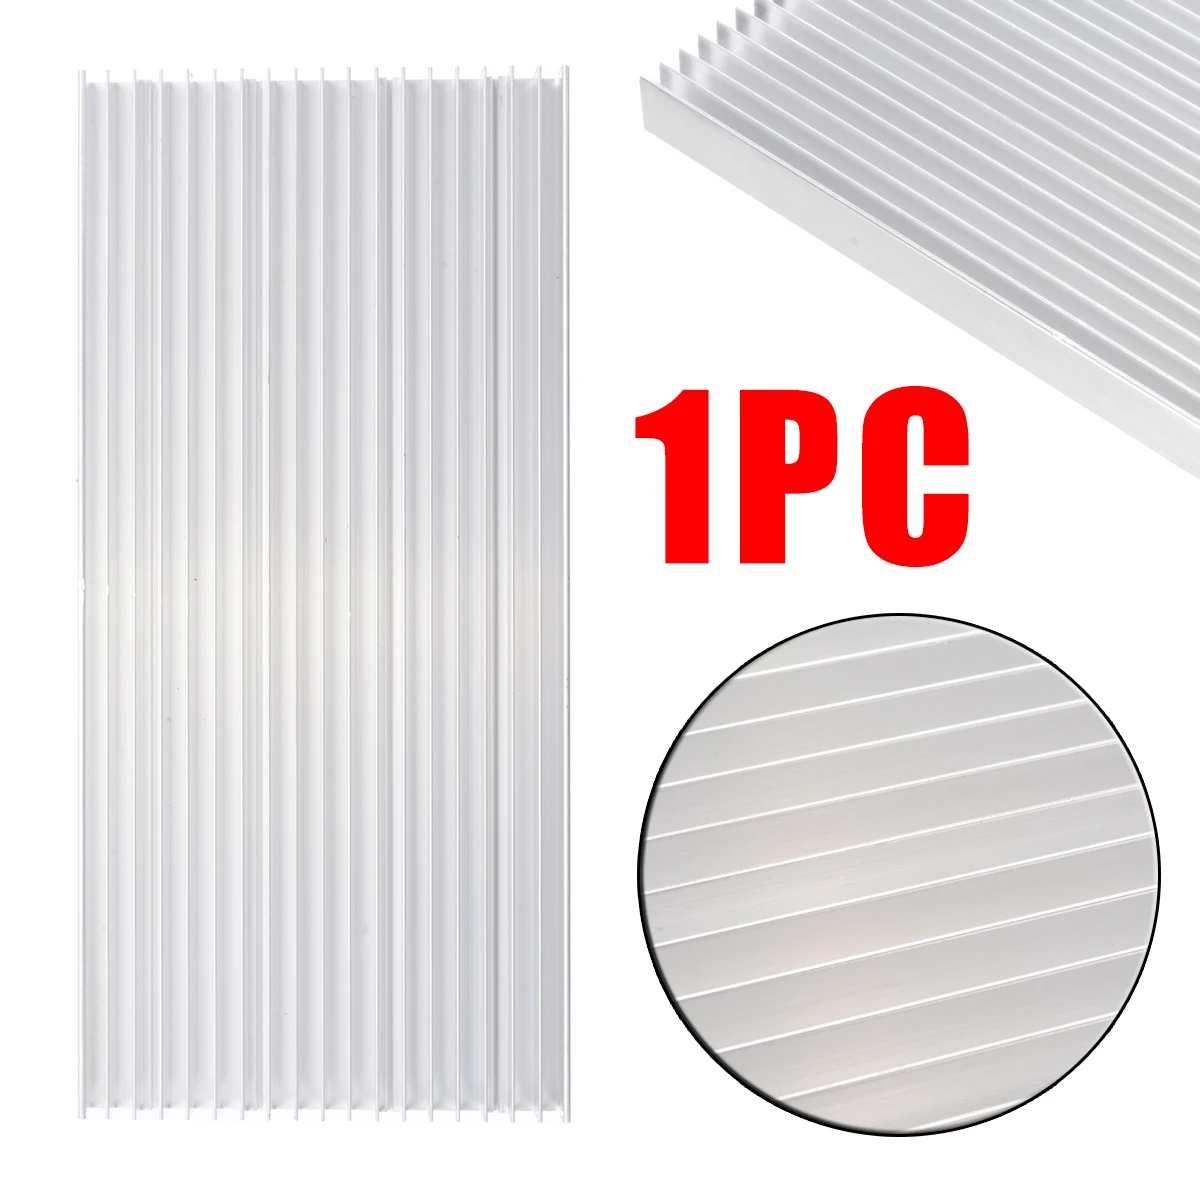 1pc 300*140*20mm Aluminum Heat Sink Cooling Heatsink for LED Power IC Transistor Heatsink Cooling Pad Replacement Cooler Parts